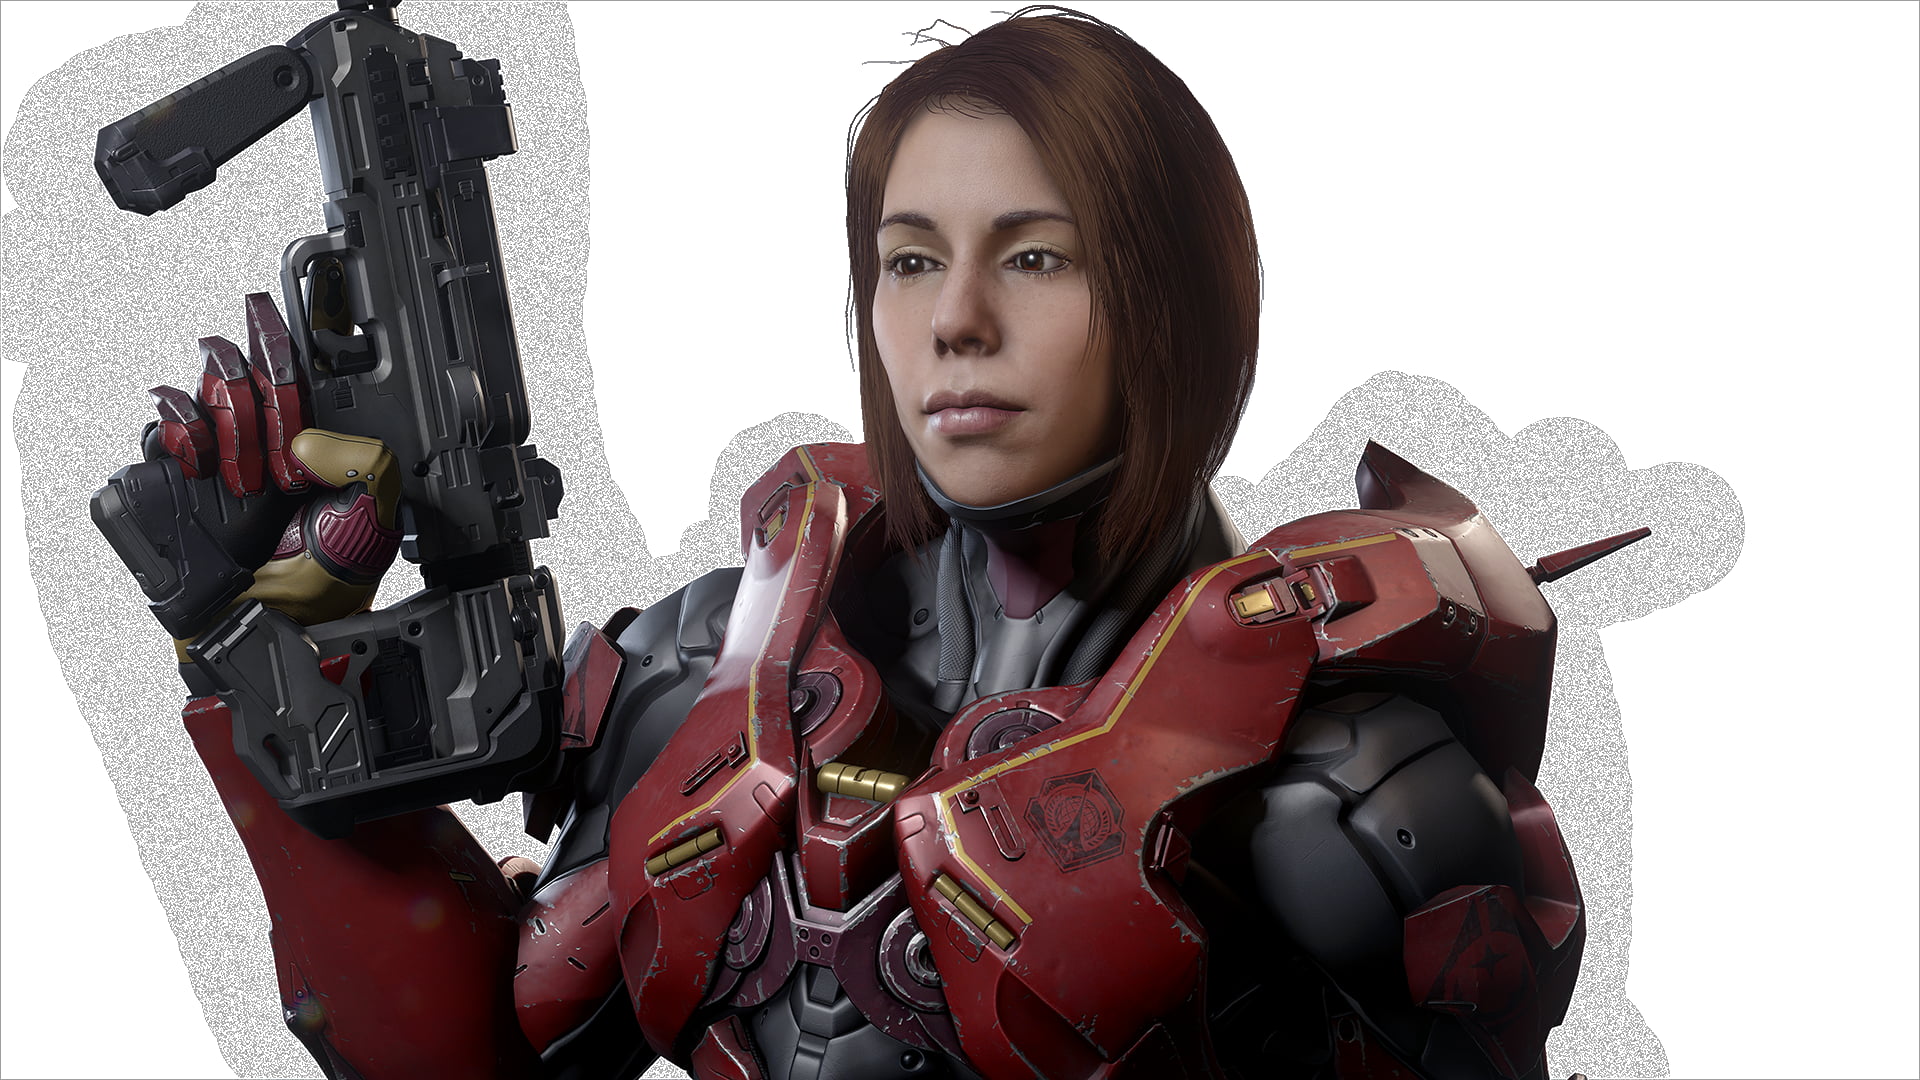 female game character in red battle suit, Halo 5, Halo, Halo 5: Guardians, Spar...